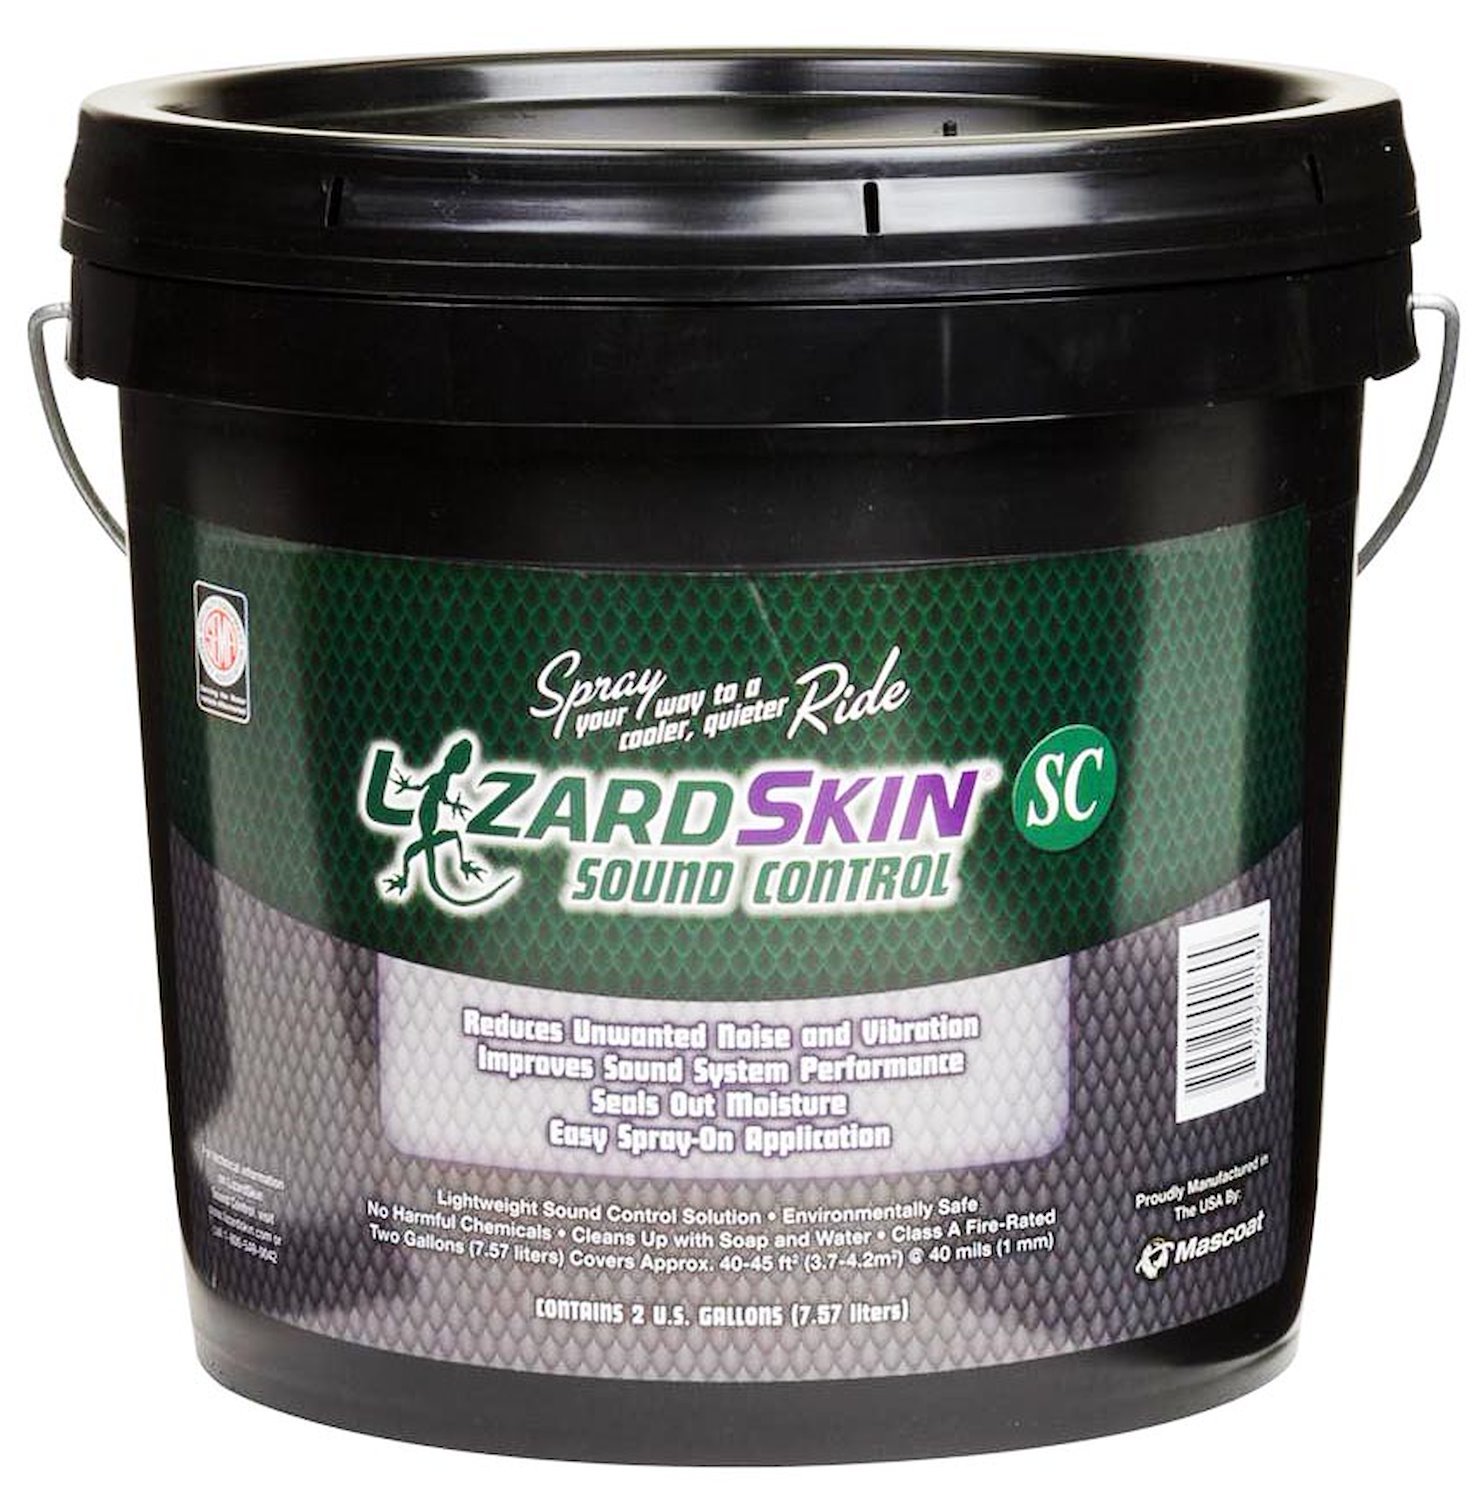 2203-2 Sound Control Insulation [2-Gallons]